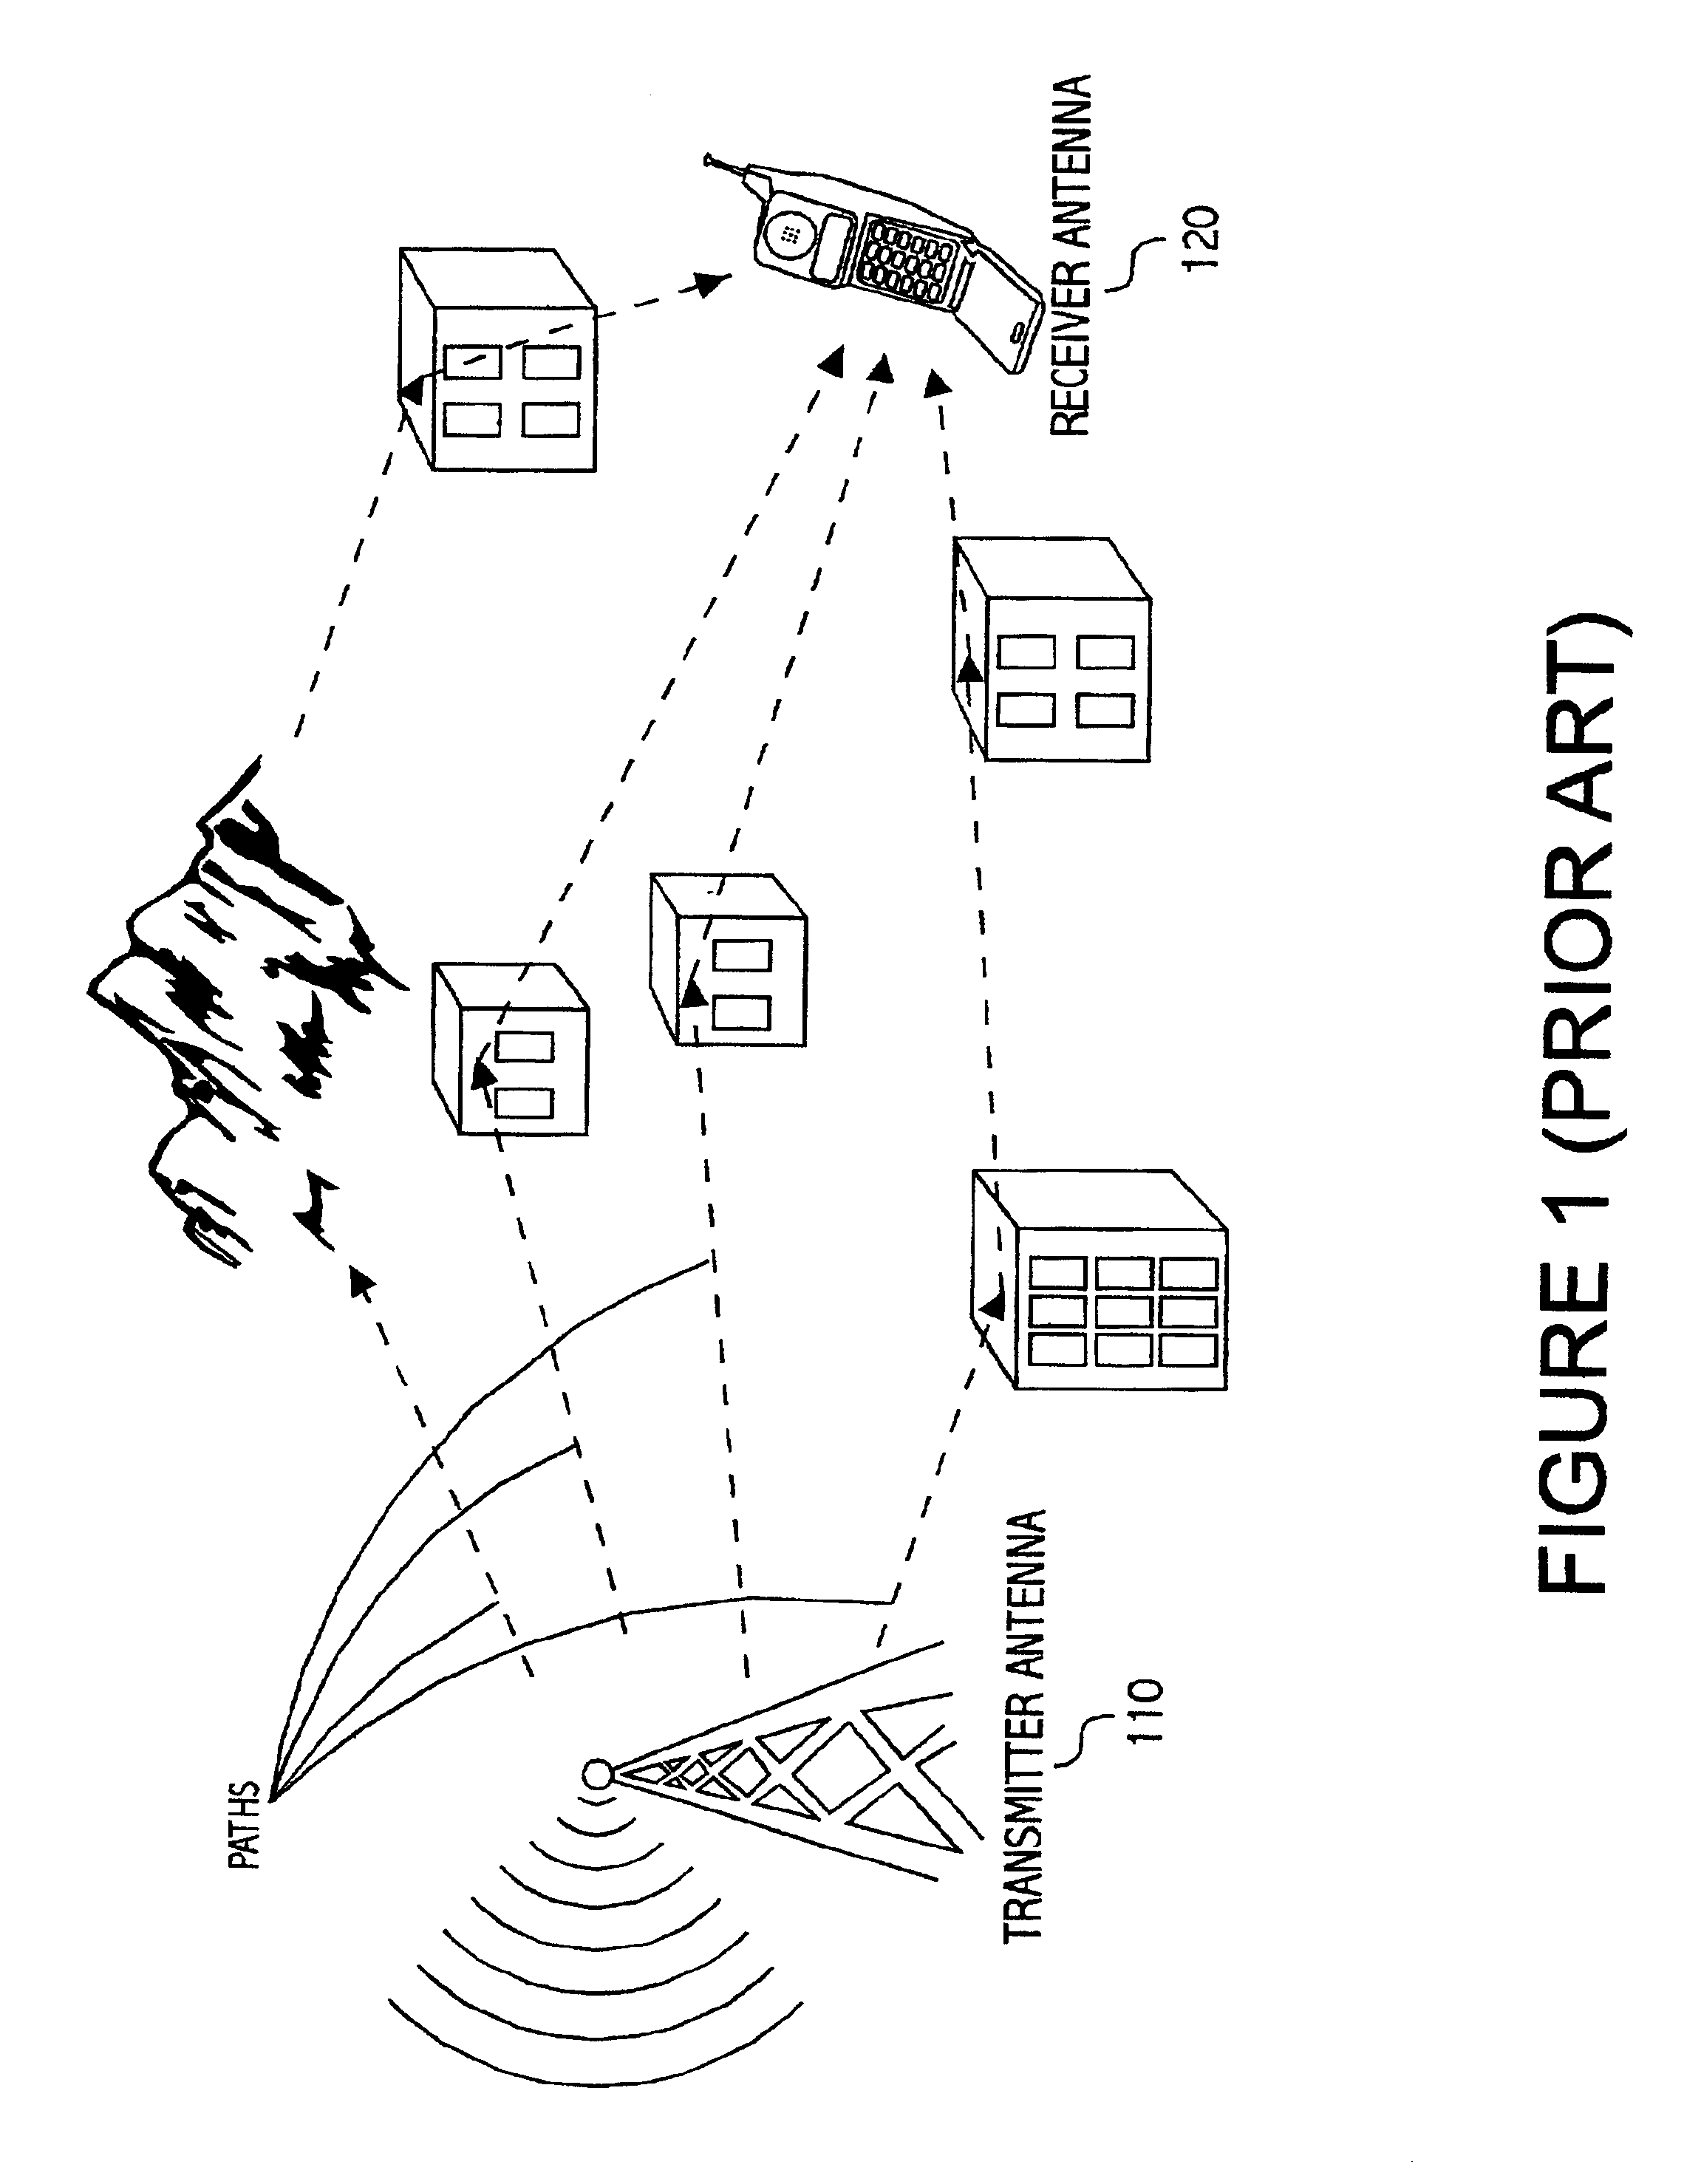 Method and system for multiple channel wireless transmitter and receiver phase and amplitude calibration